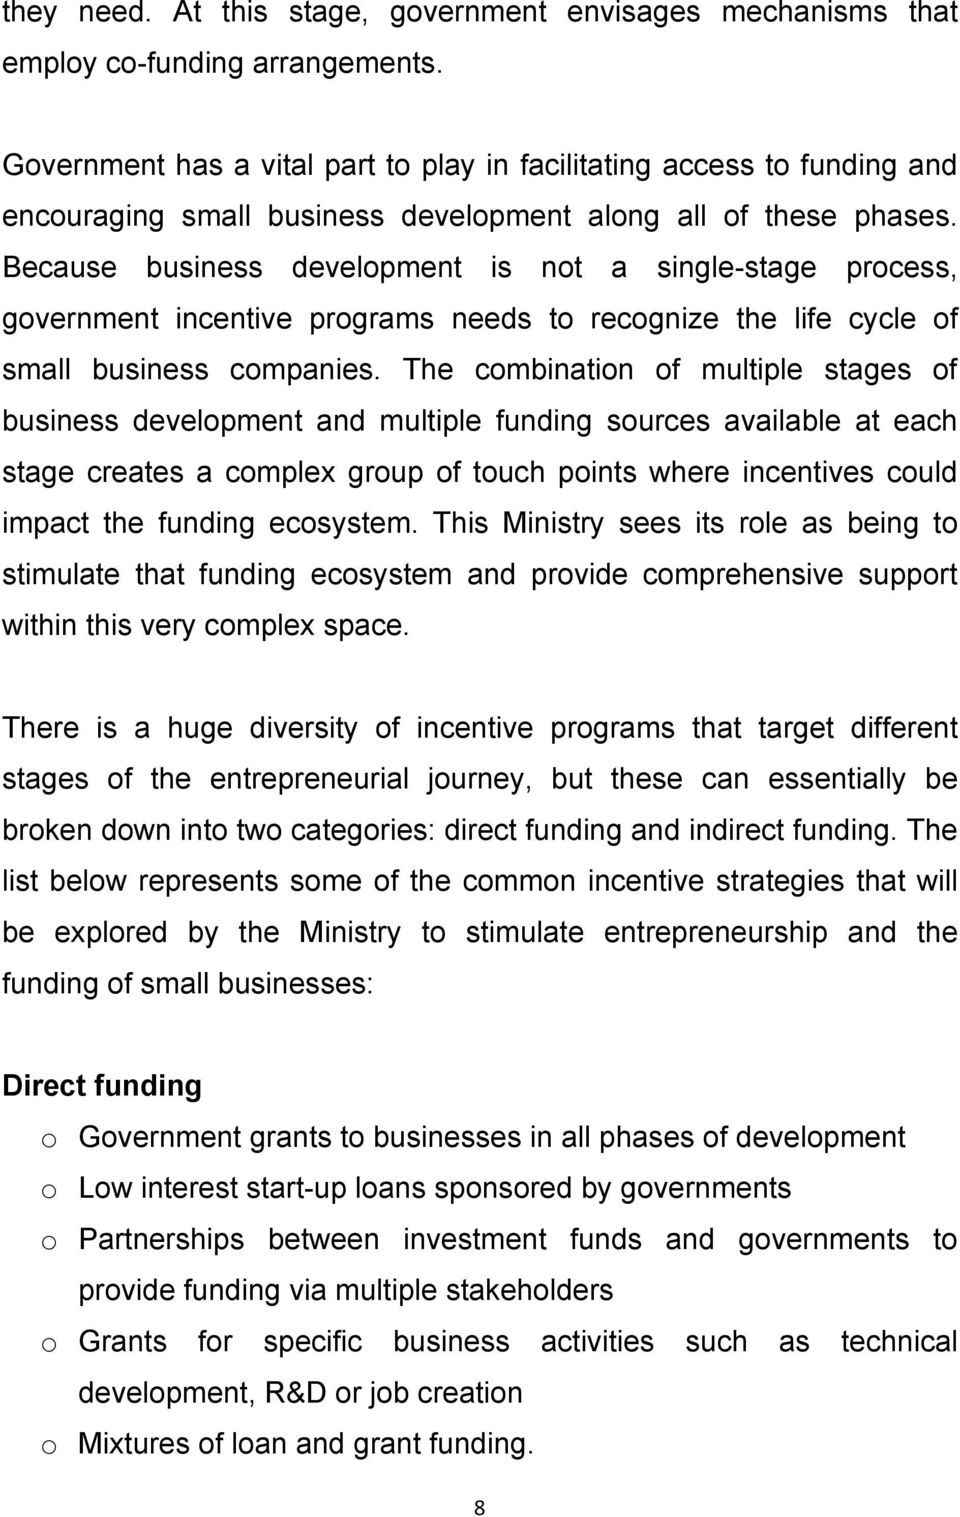 Because business development is not a single-stage process, government incentive programs needs to recognize the life cycle of small business companies.